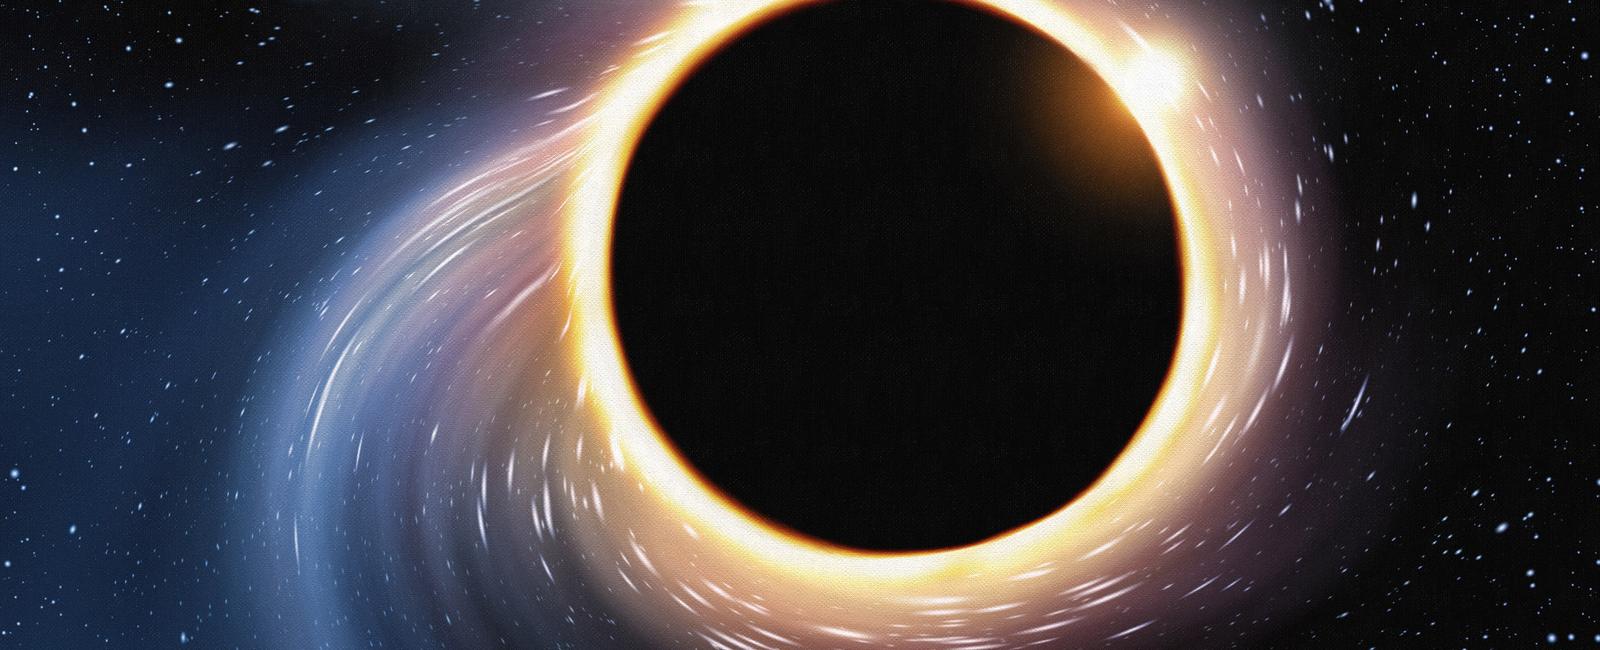 A black hole has no size yet it weighs millions of times more than our sun